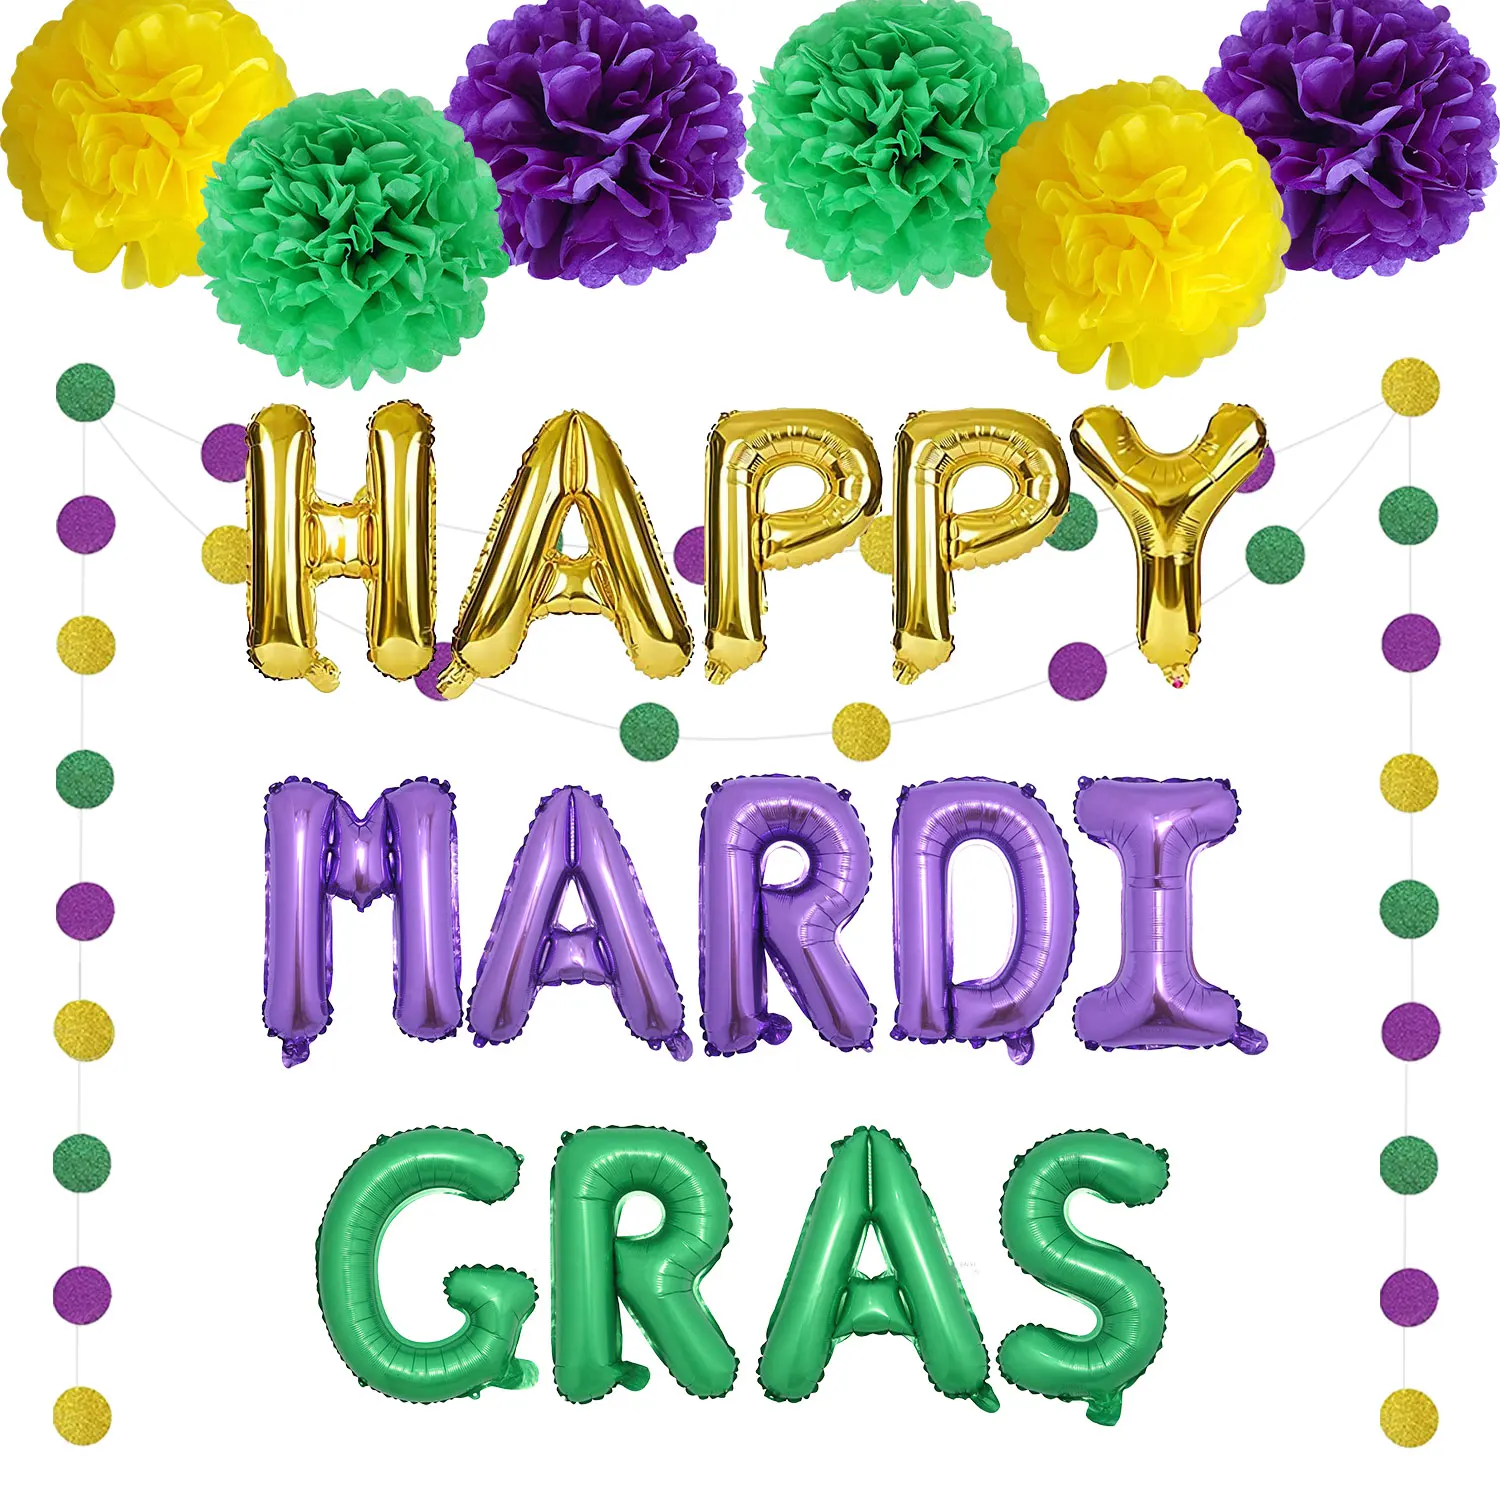 

Happy Mardi Gras Decorations with Gold Purple Green Paper Pom Poms Mardi Gras Balloons for New Orleans Carnival Party Supplies